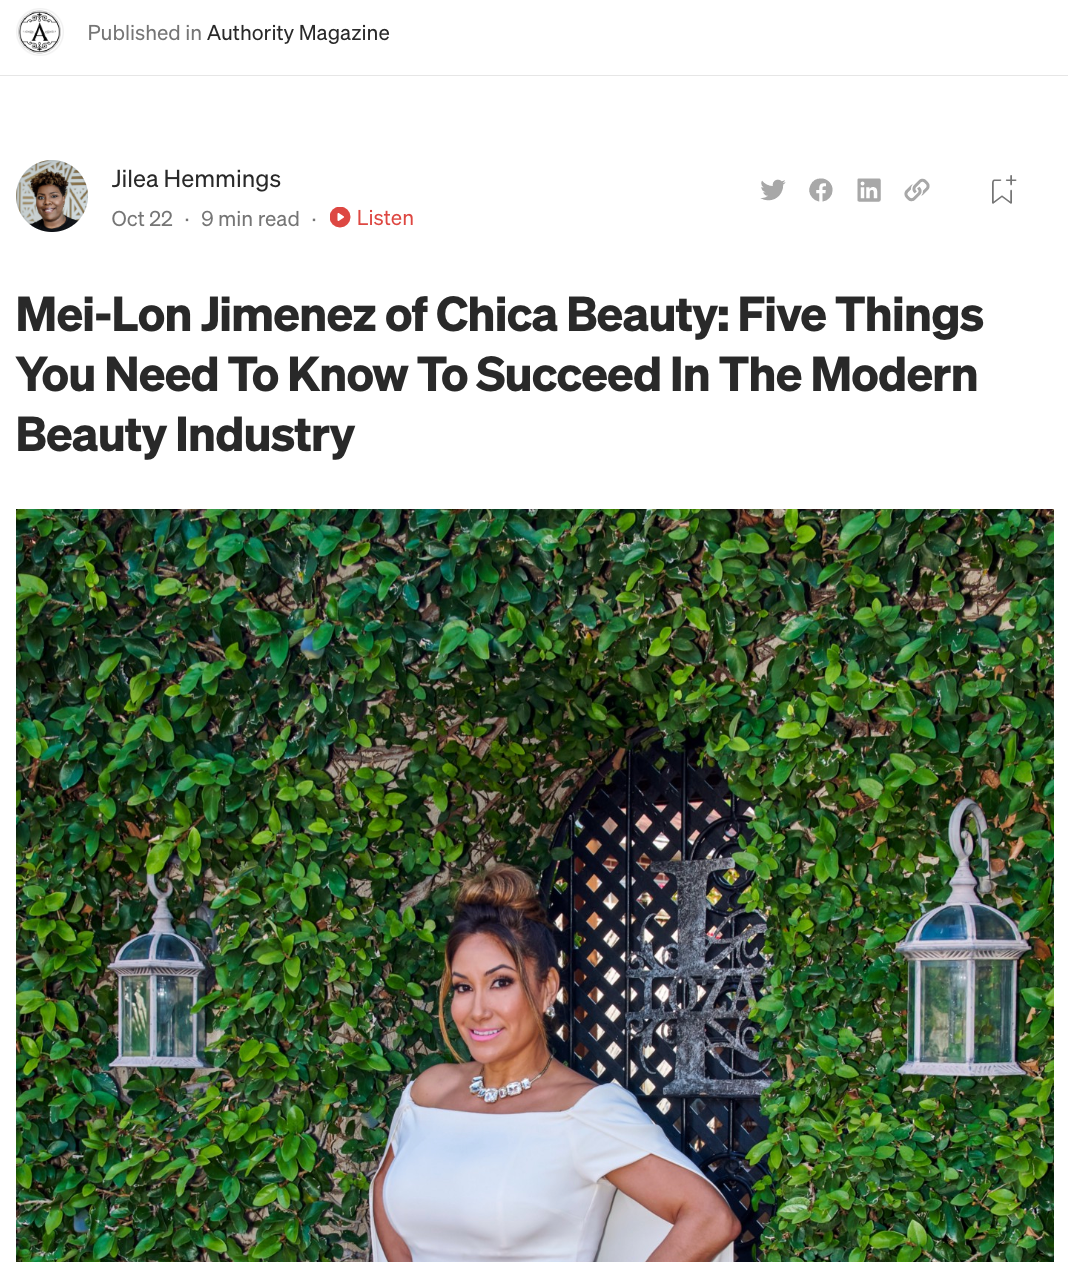 Mei-Lon Jimenez of Chica Beauty: Five Things You Need To Know To Succeed In The Modern Beauty Industry